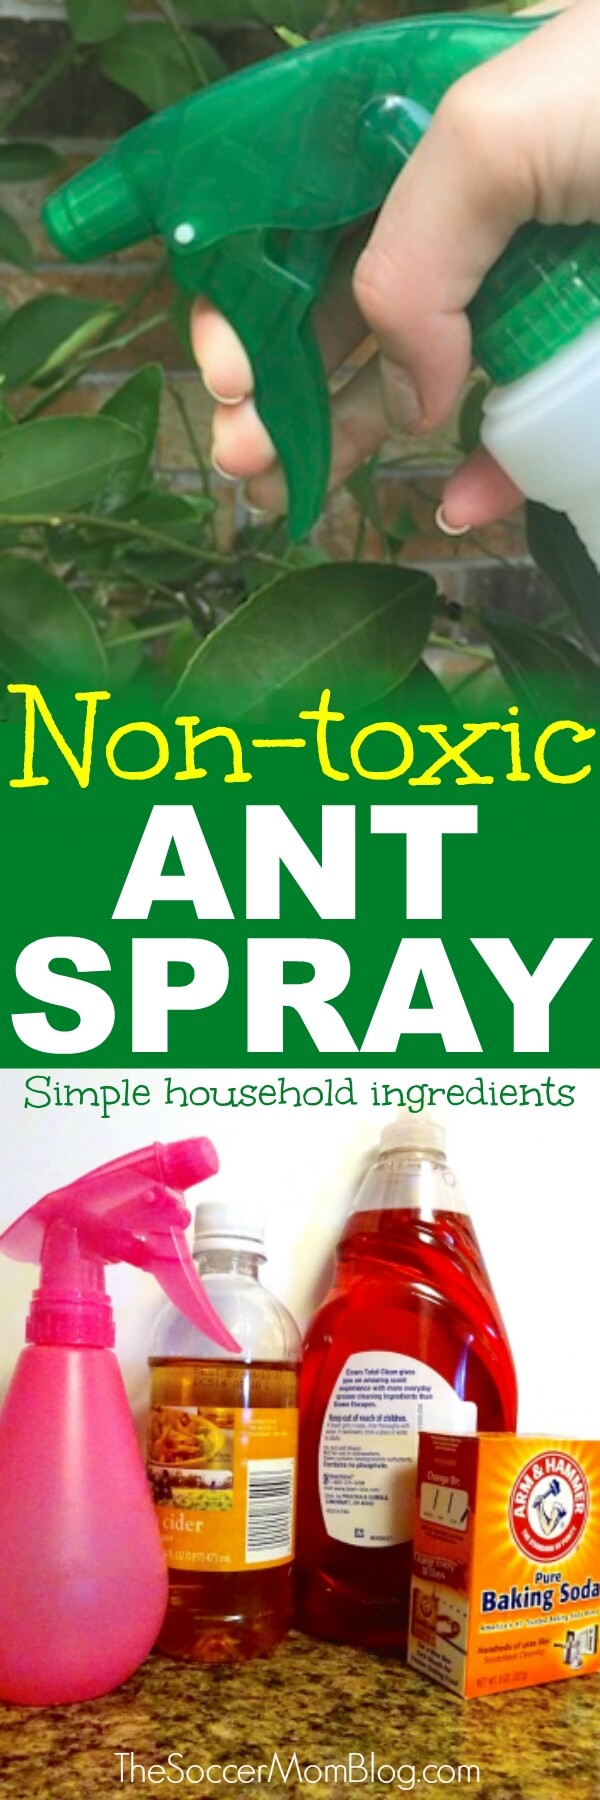 Forget harsh chemicals! This DIY natural ant killer is safe, easy, cheap, and IT WORKS! Safe for use around children and pets.